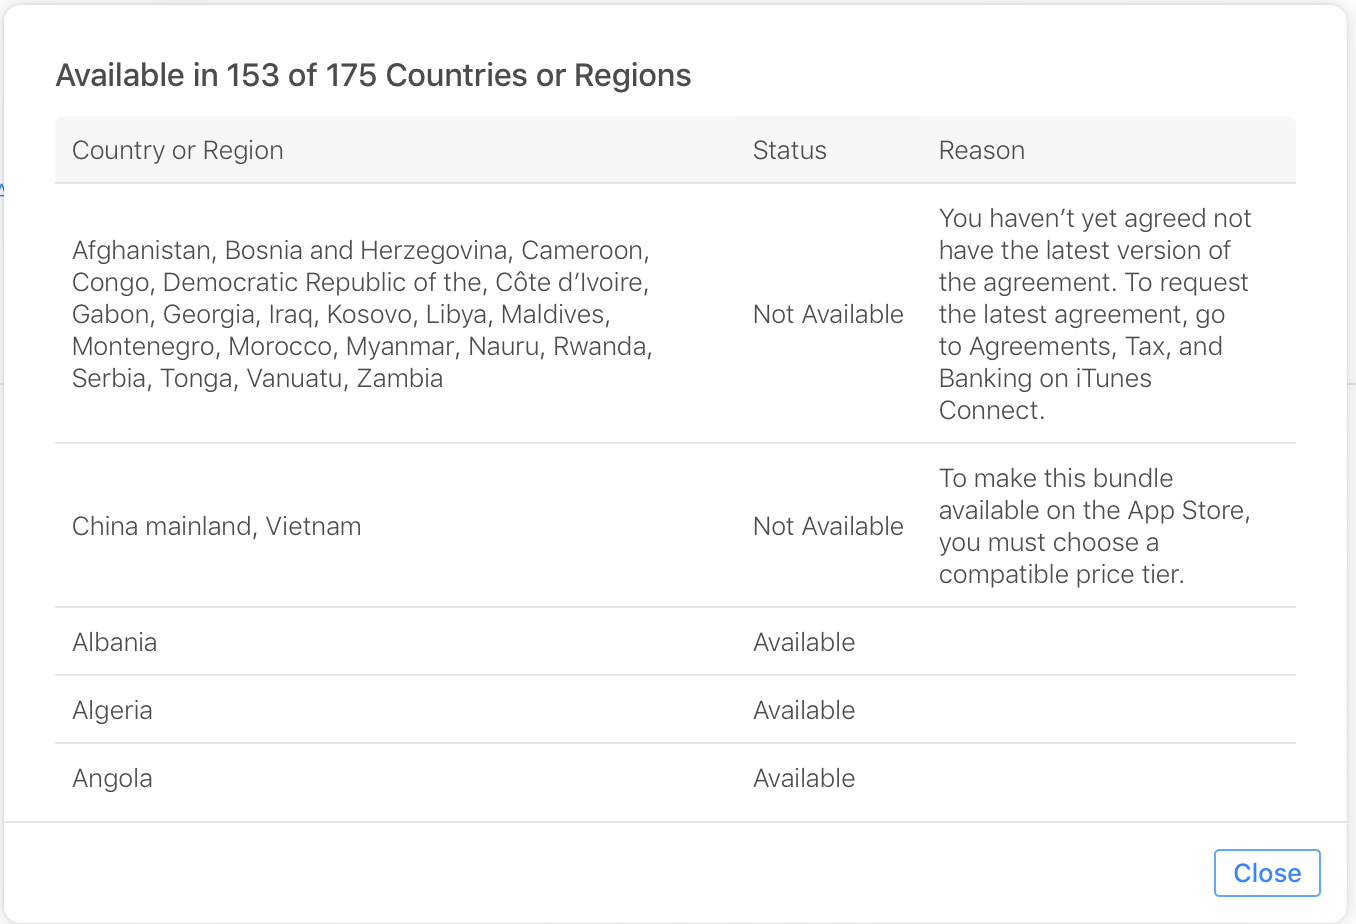 「Available in 153 of 175 Countries or Regions」(175 の国または地域のうち 153 が配信可能) ダイアログ